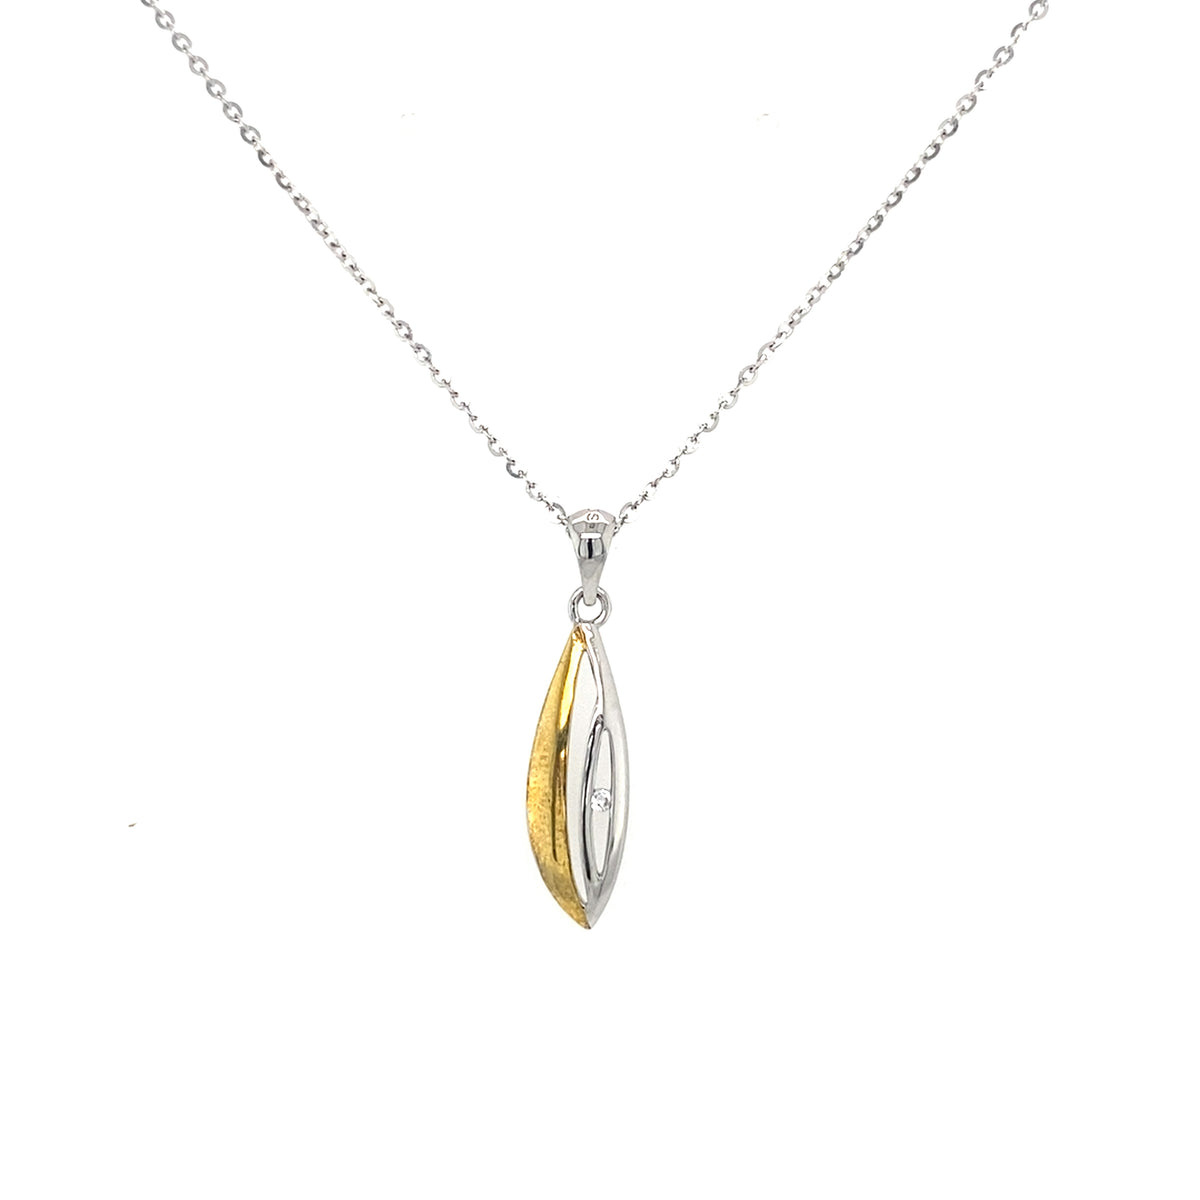 Sterling Silver Pendant with a Touch of Gold